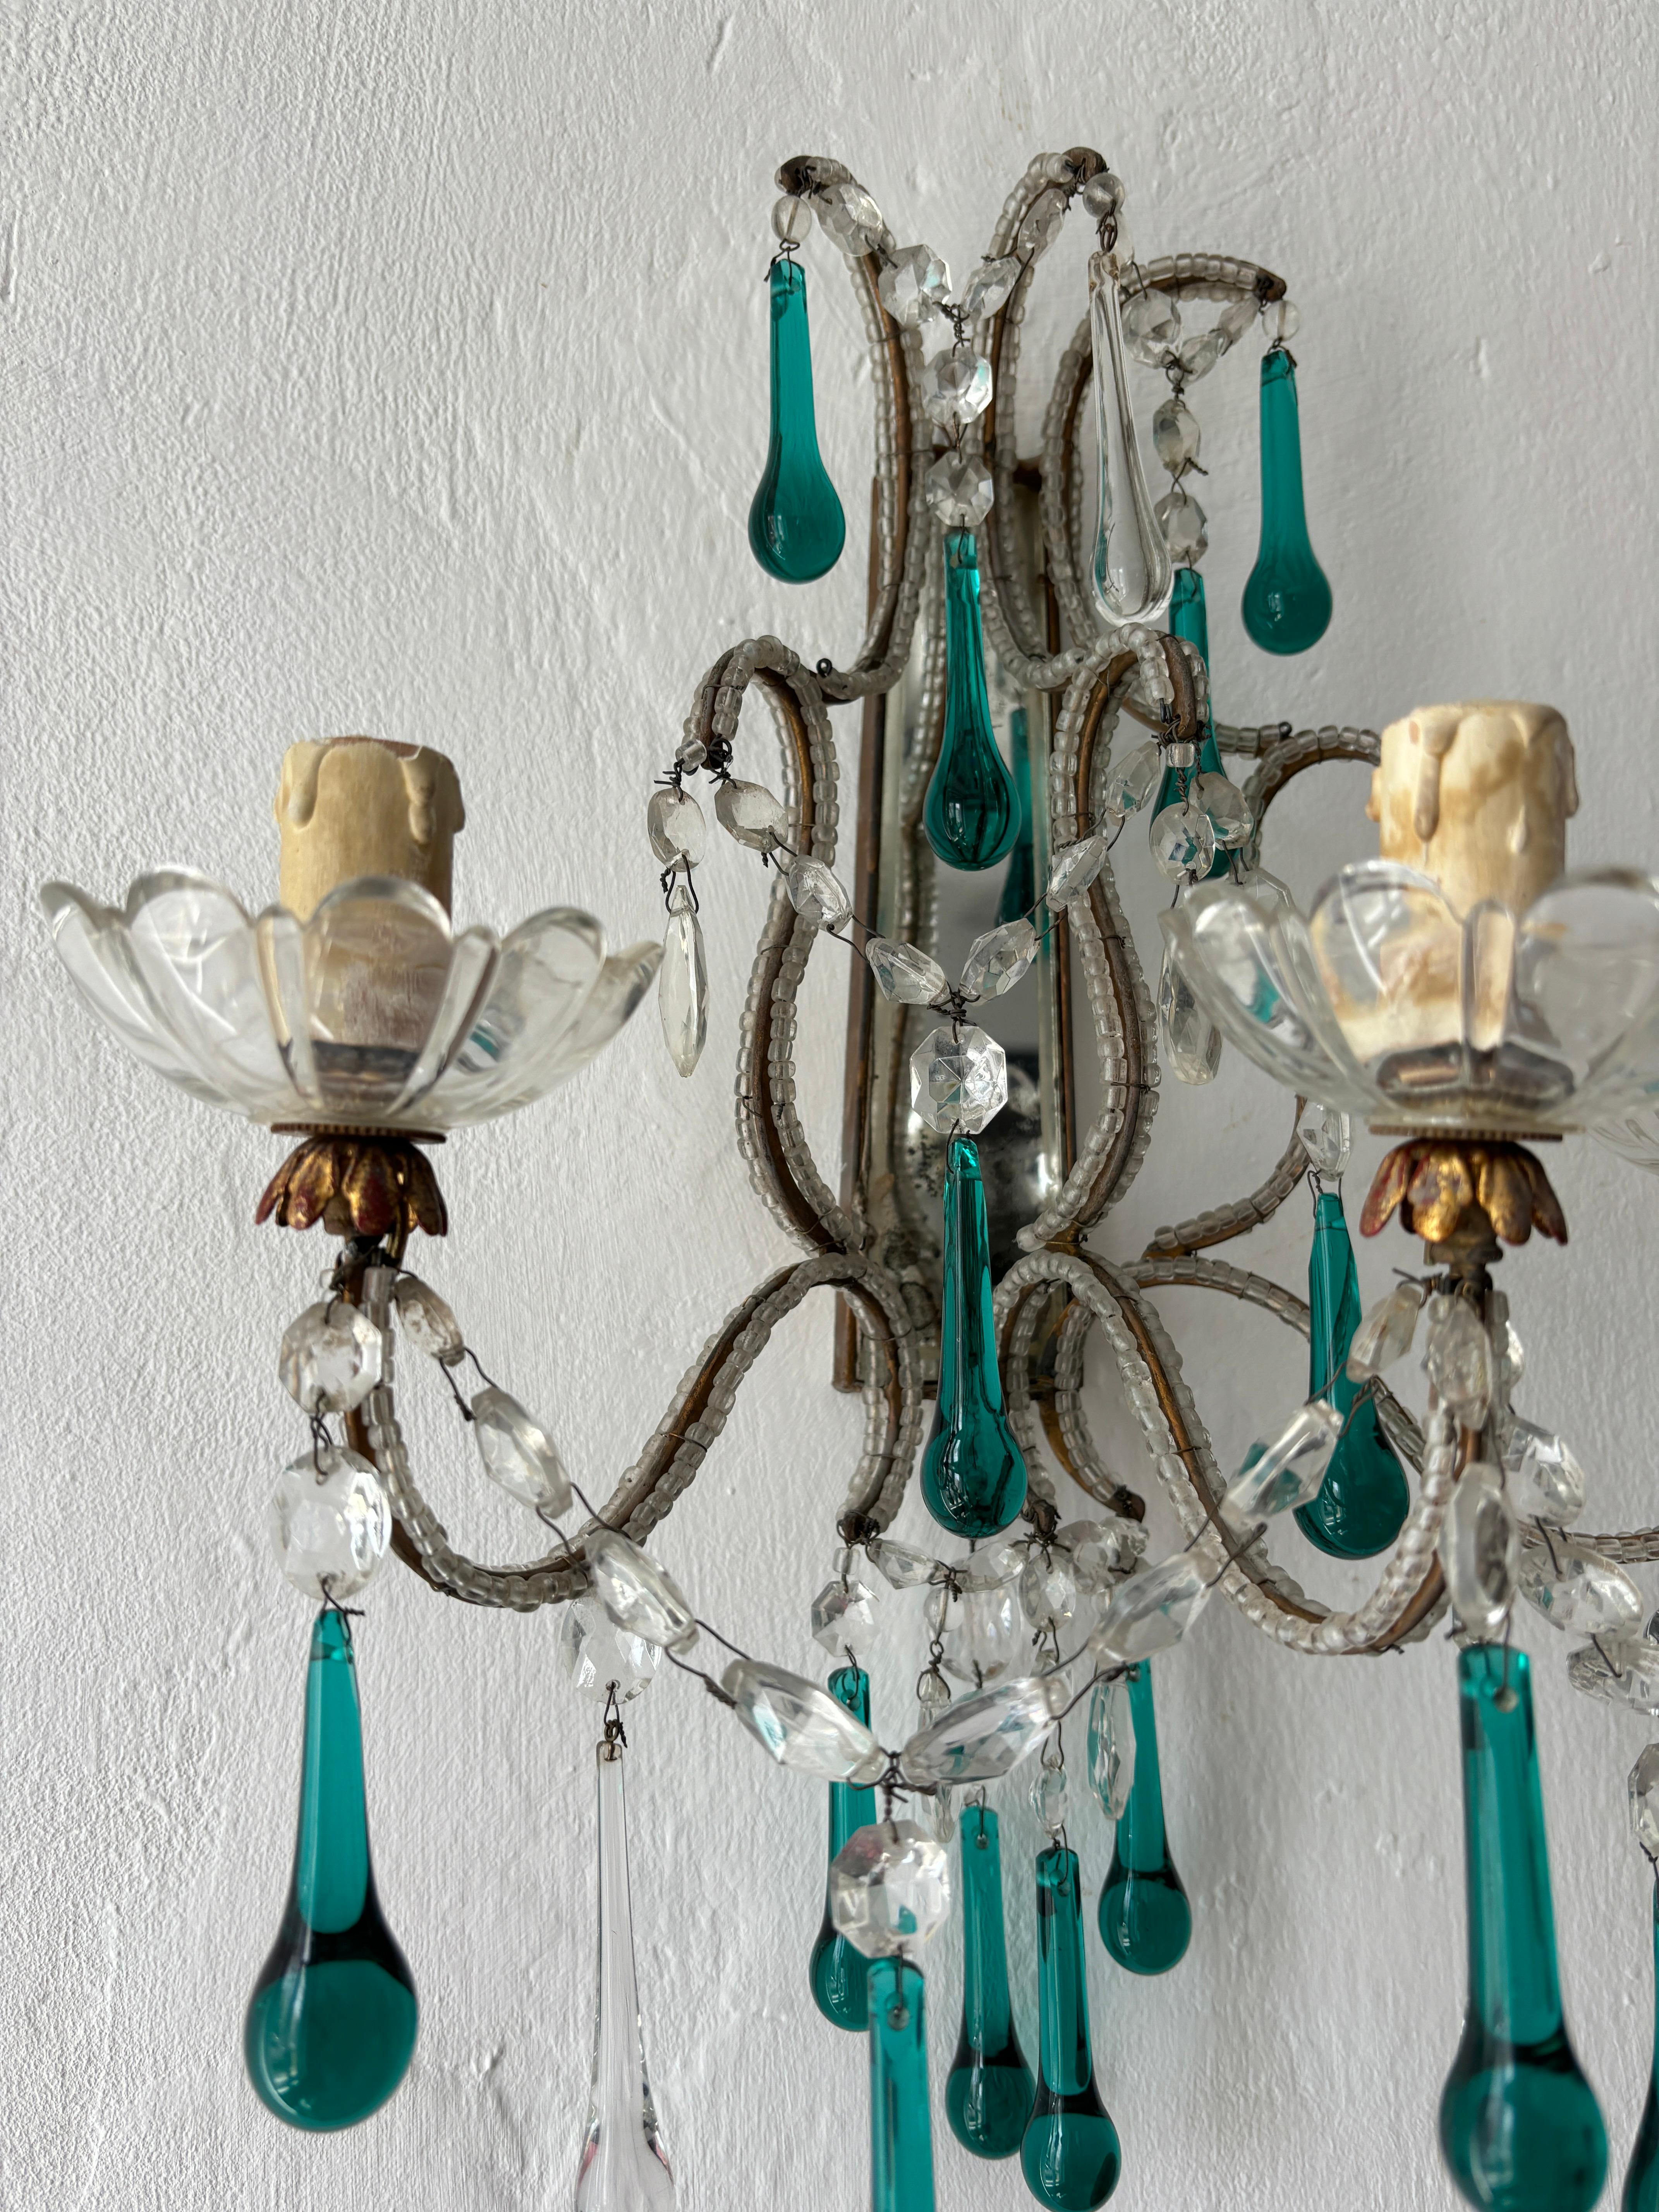 Early 20th Century c 1900 French Beaded Extremely Rare Sea foam Green Murano Drops Mirrors Sconces For Sale